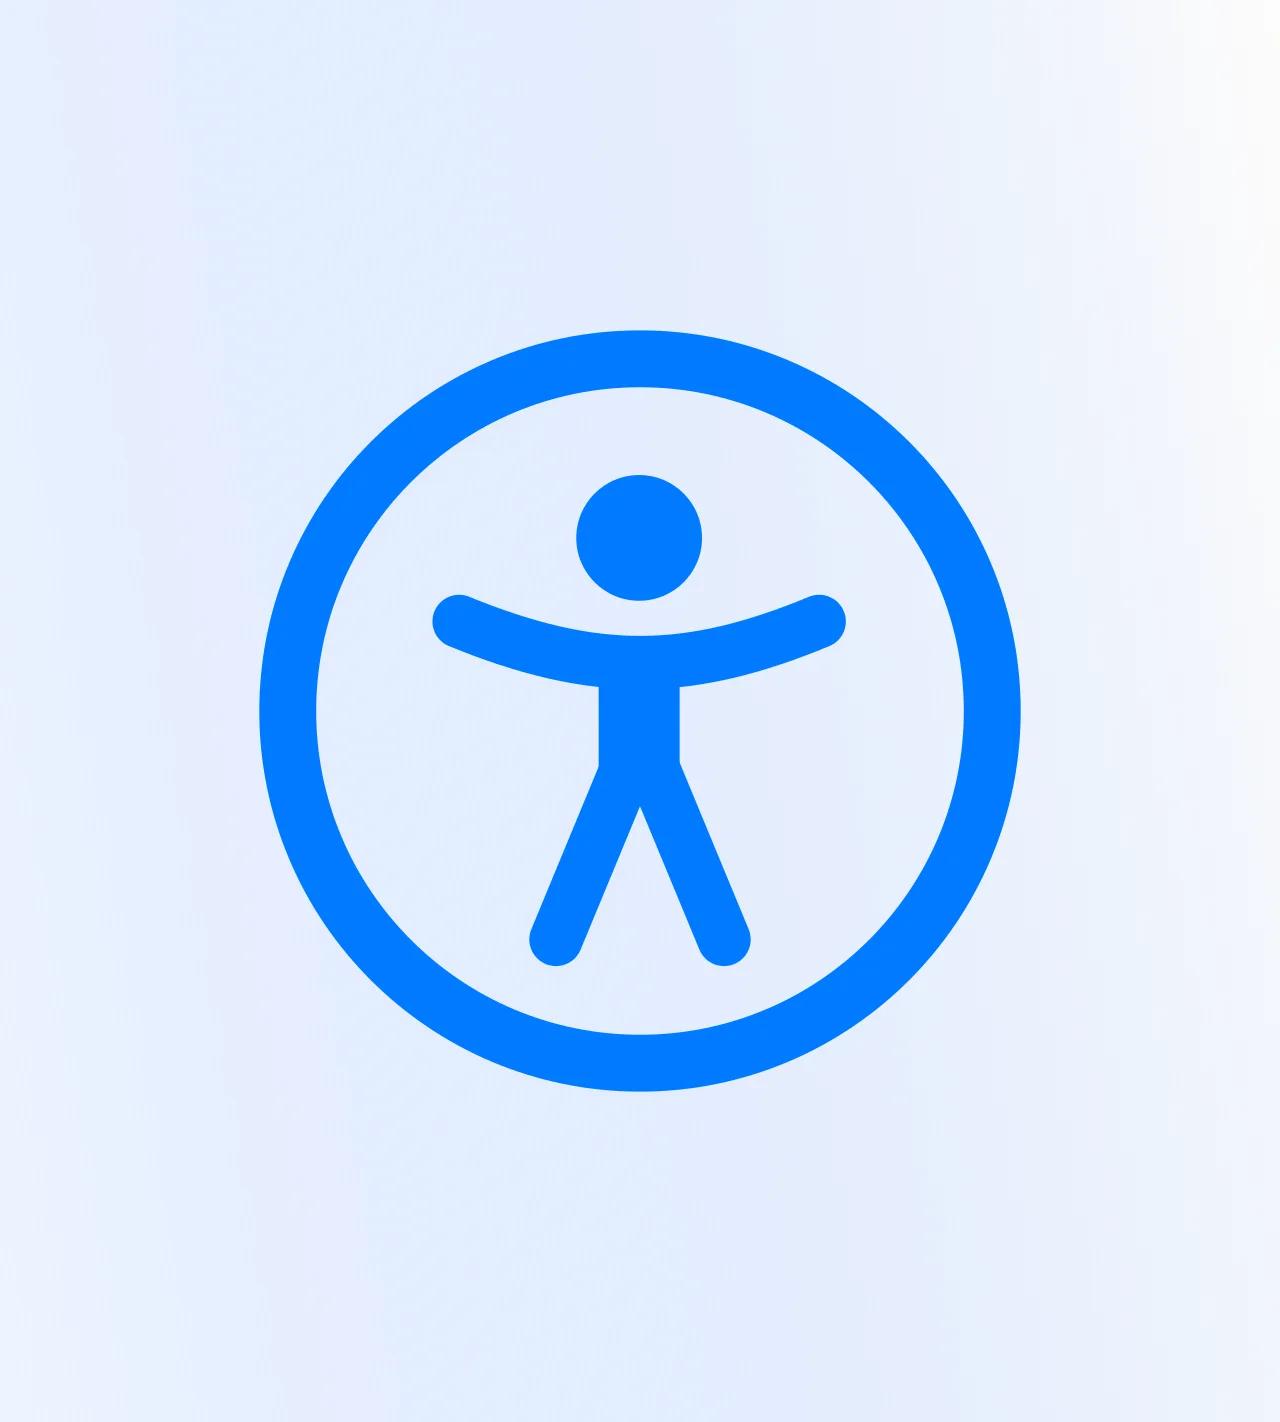 Blue sign in the form of a graphic man in a circle